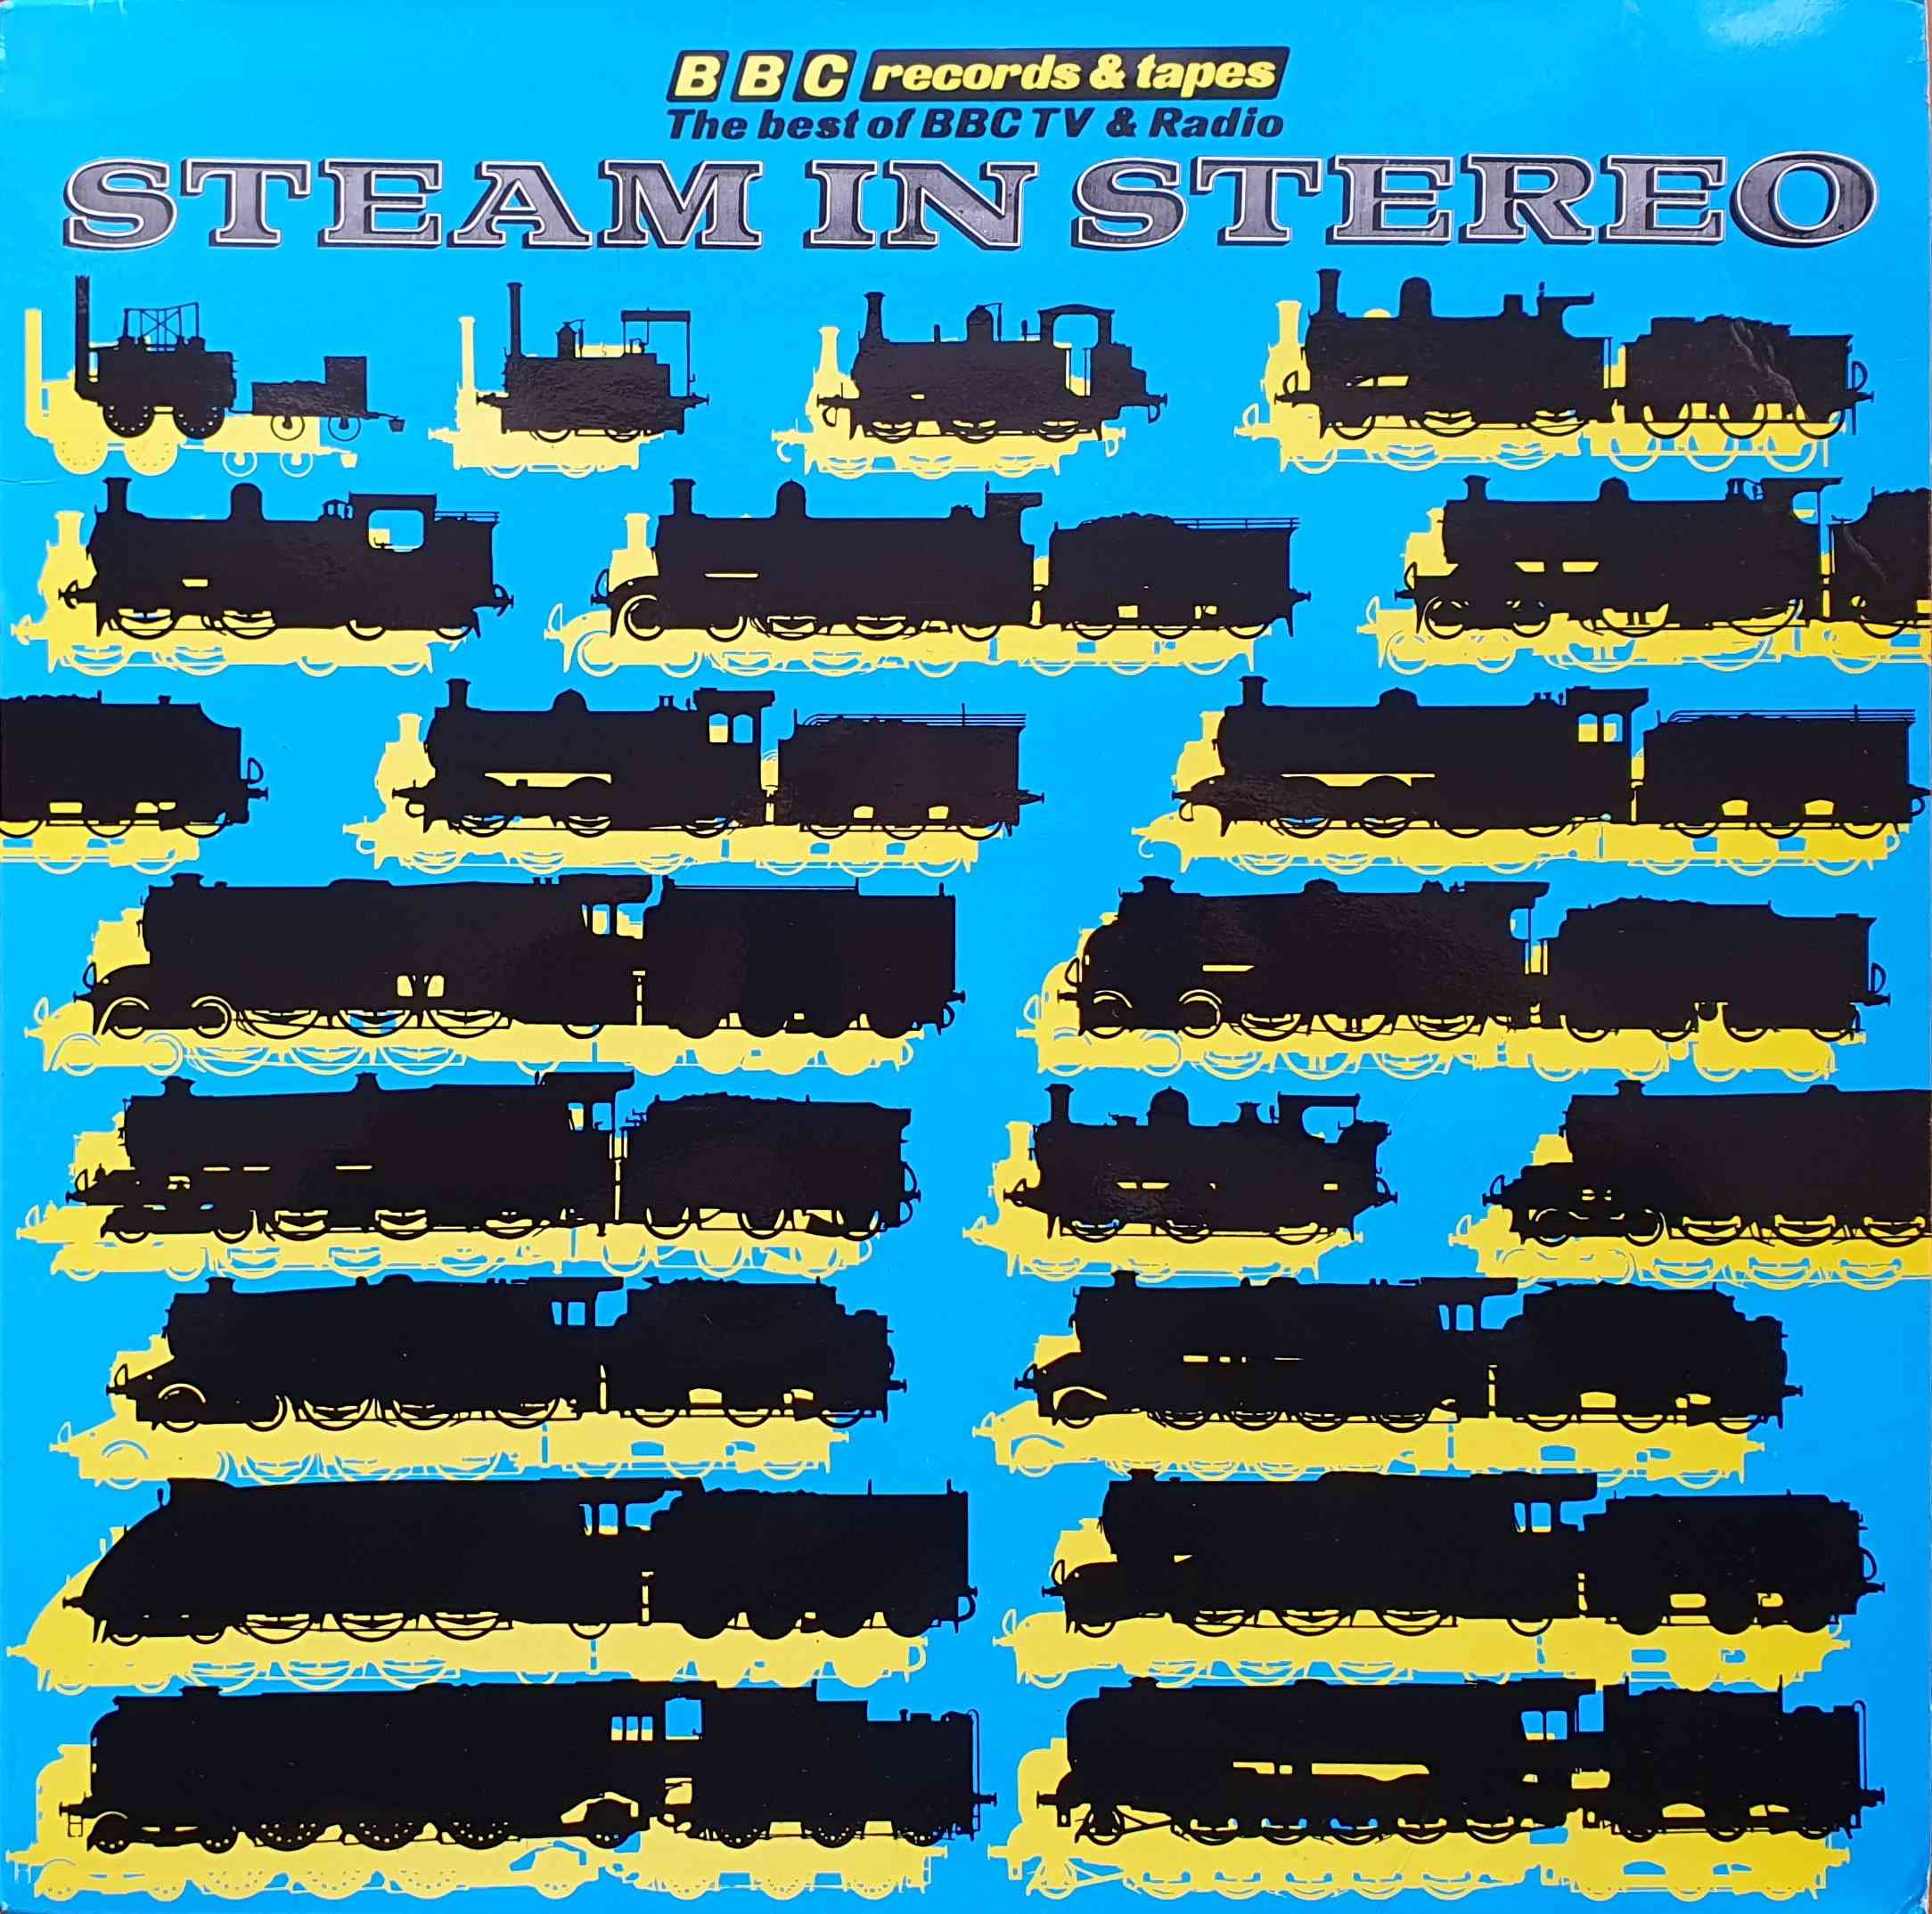 Picture of REC 220 Steam in stereo by artist Various / Bob Symes-Schutzmann from the BBC albums - Records and Tapes library